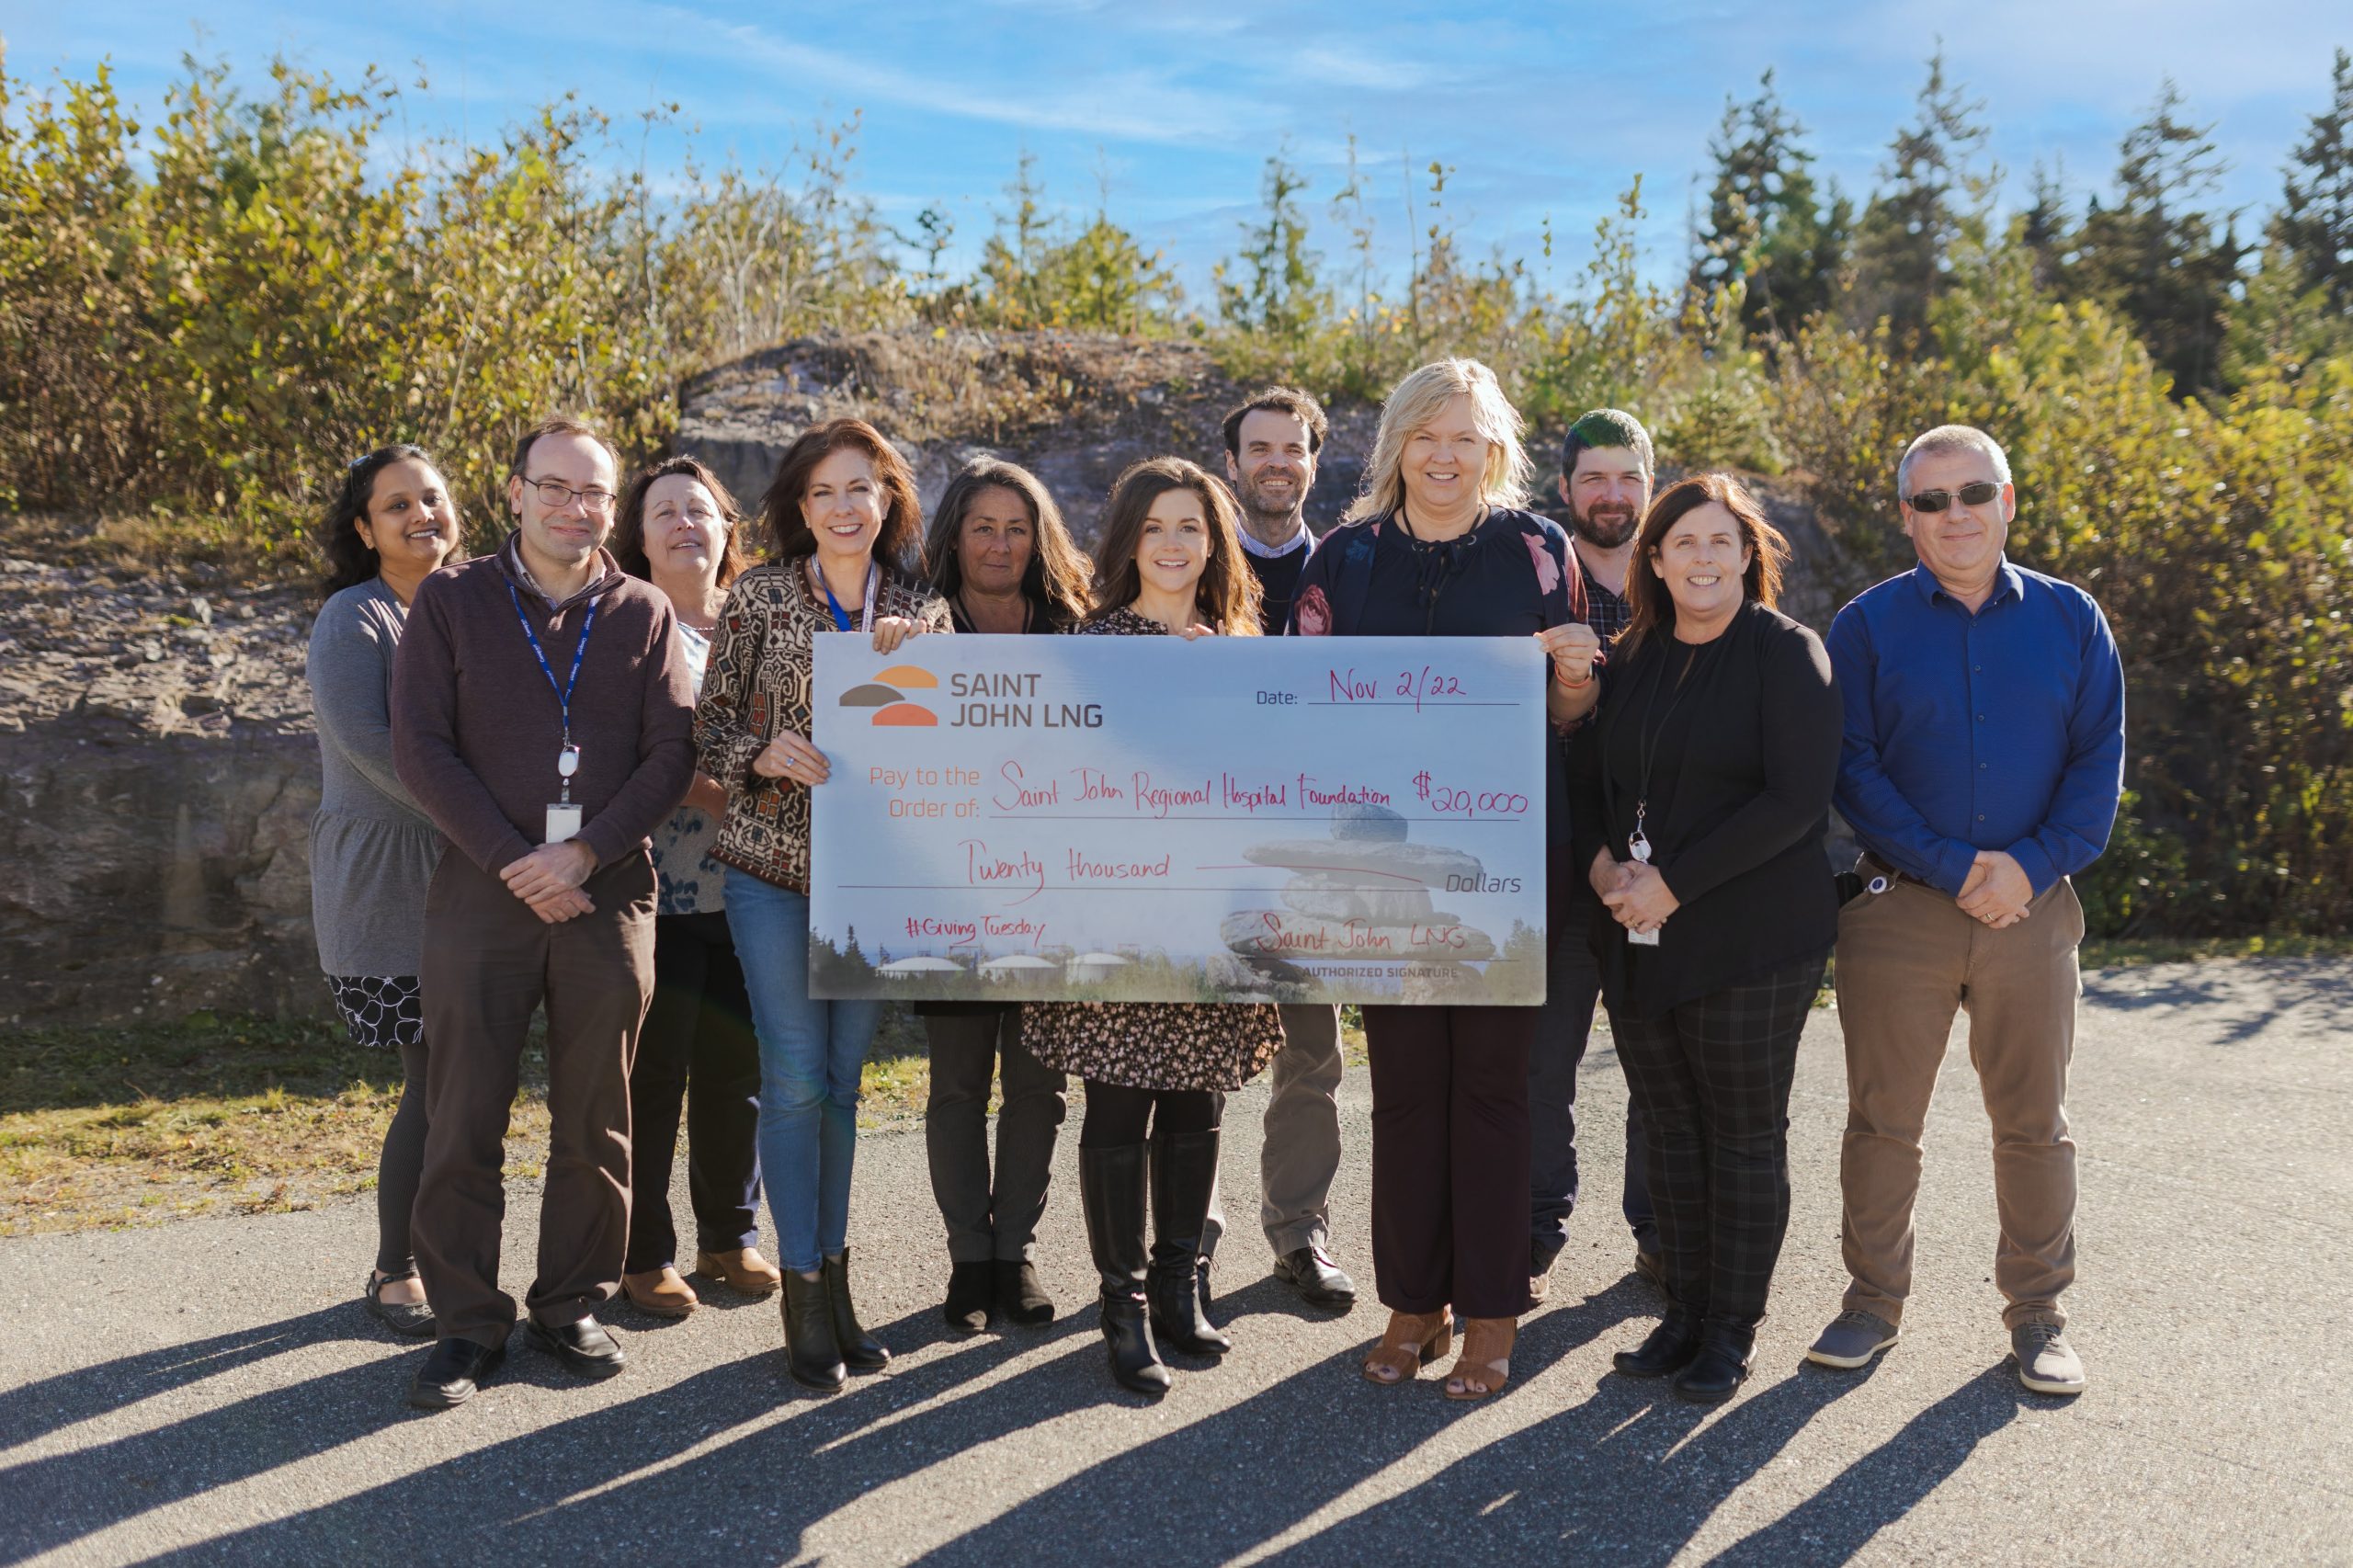 Staff of Saint John LNG are joined by Andrea Watling of the Saint John Regional Hospital to present their cheque of $20,000 as the matching partner for Giving Tuesday.